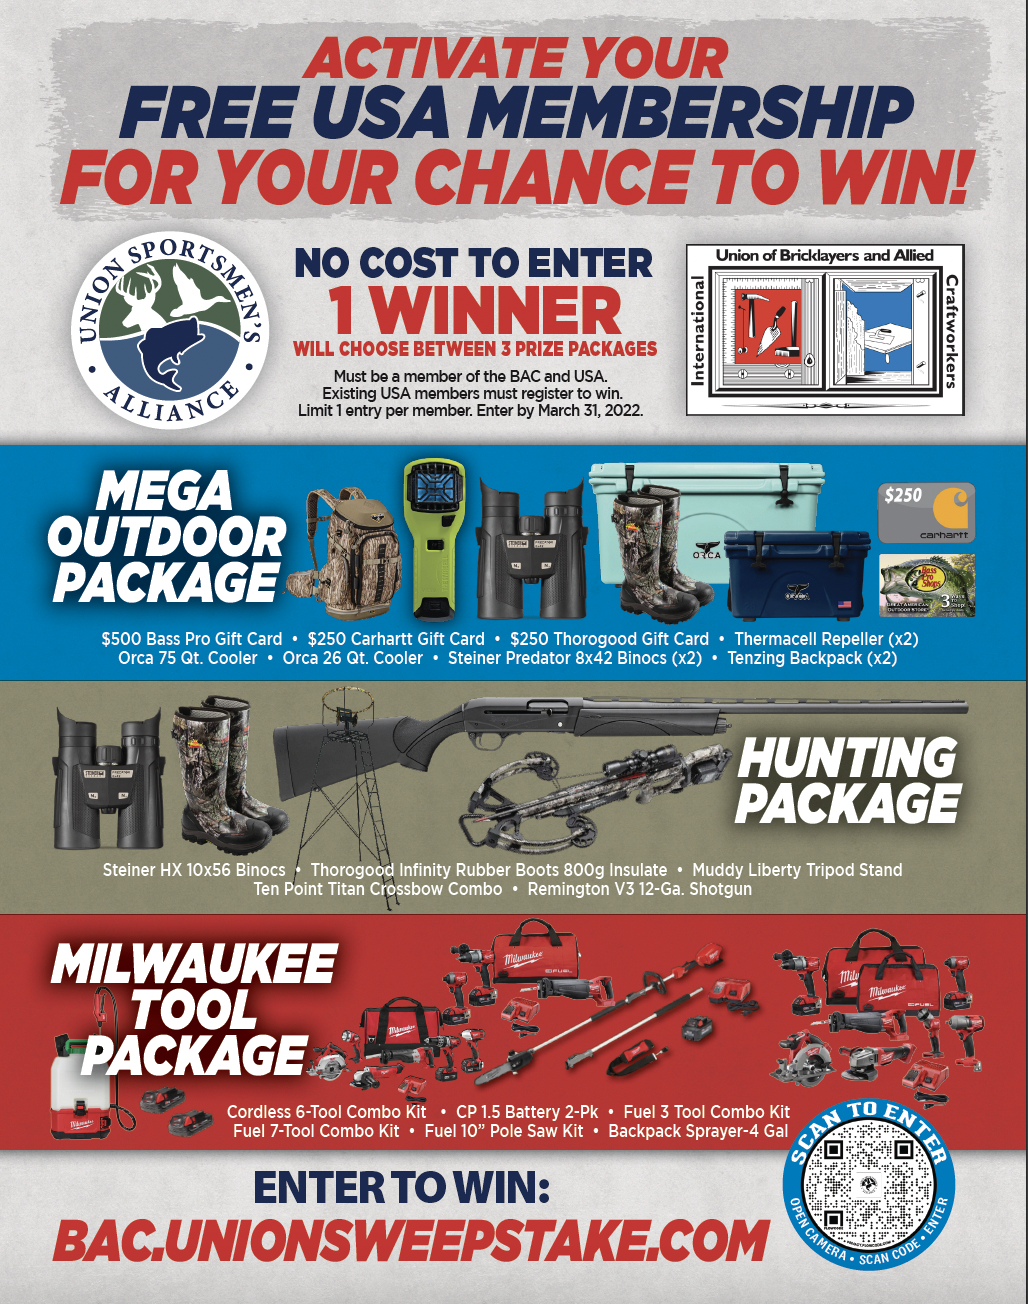 ACTIVATE YOUR FREE USA MEMBERSHIP FOR YOUR CHANCE TO WIN!